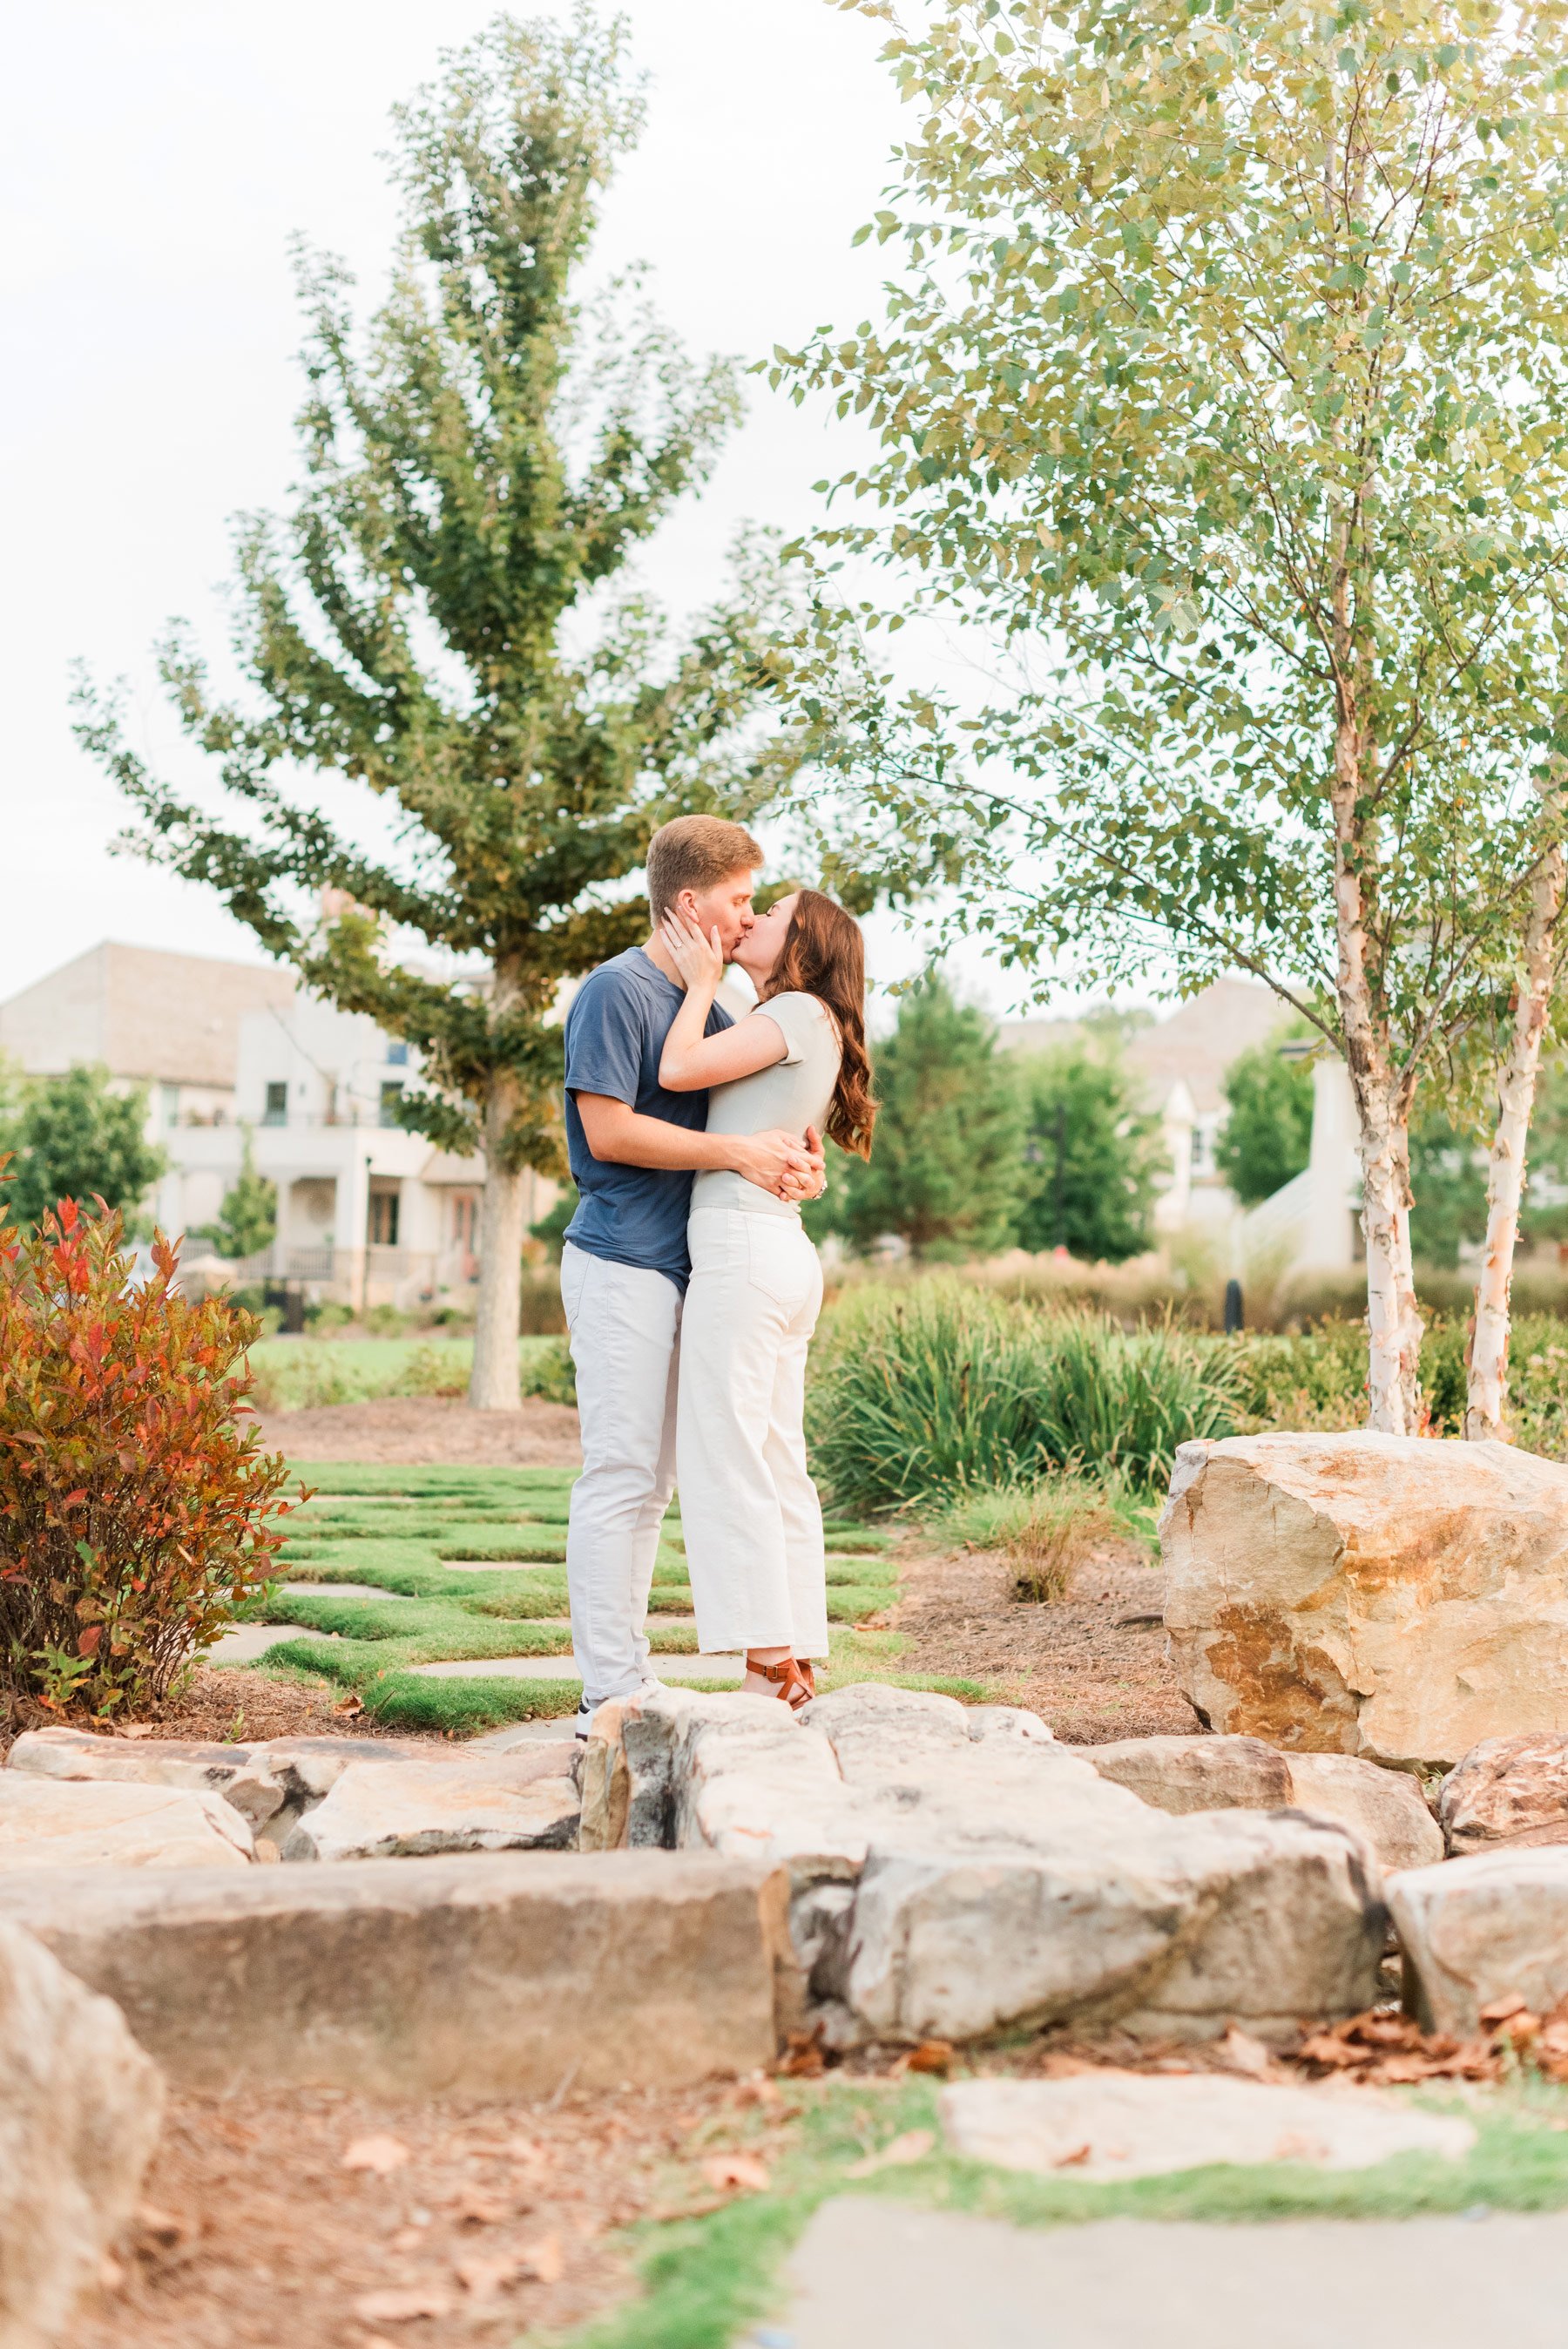    This sweet engaged couple shares a kiss in the park during their Fayetteville engagement session. #trilithstudios #georgiaweddingphotographer #fayettevillephotographer #fayettevilleengagementphotos #outdoorengagements #formalengagementphotos #reas